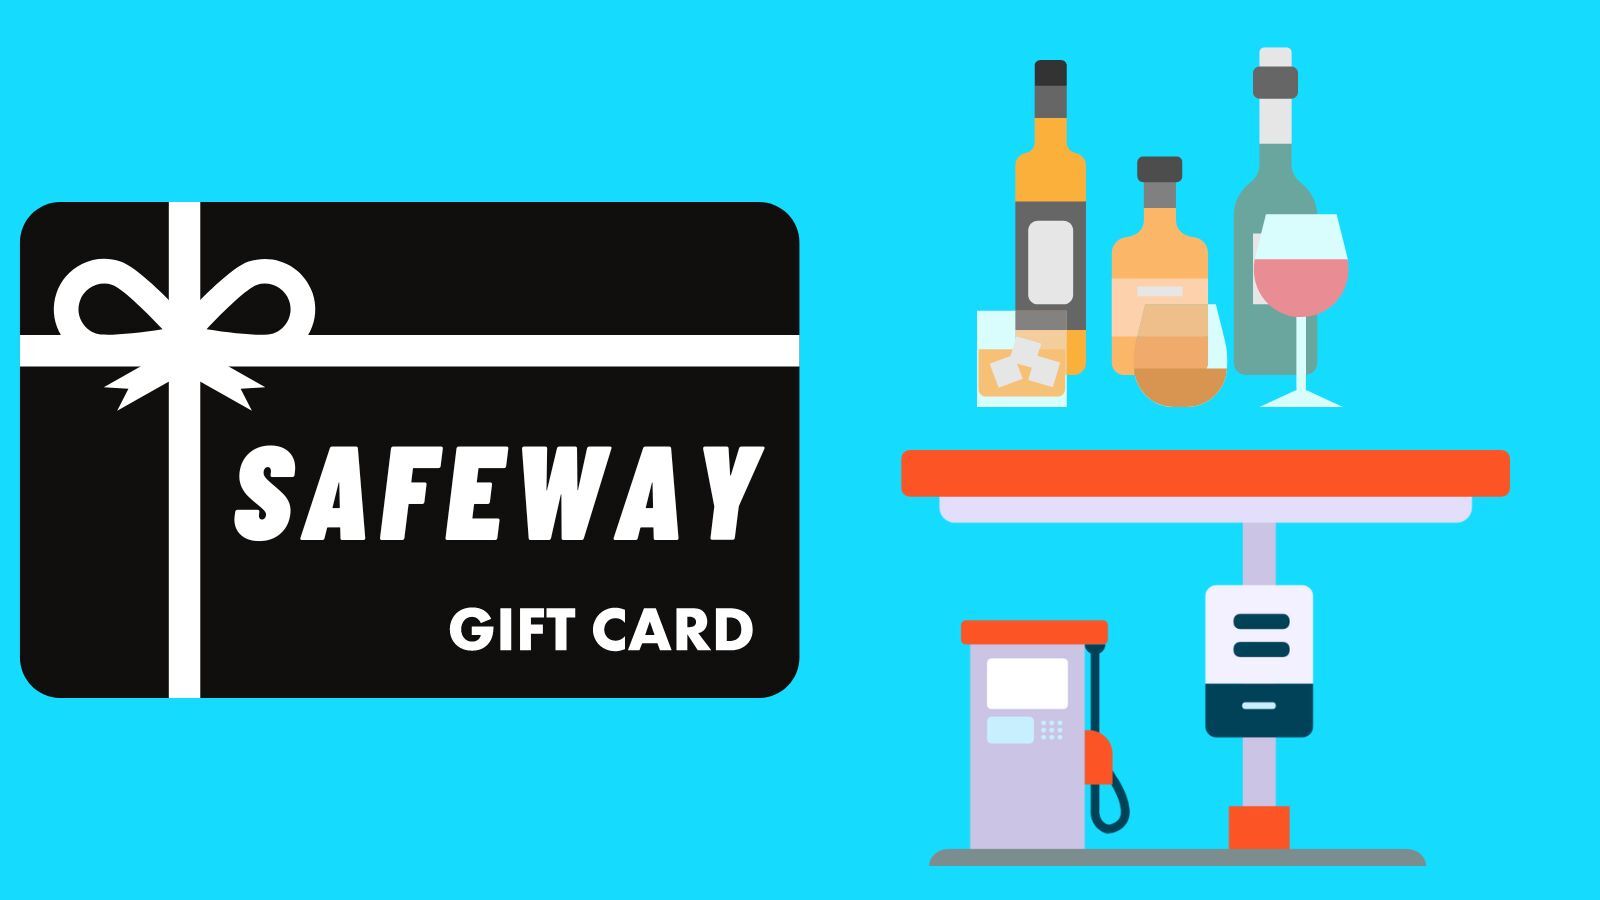 Can You Use A Safeway Gift Card For Alcohol At Starbucks?